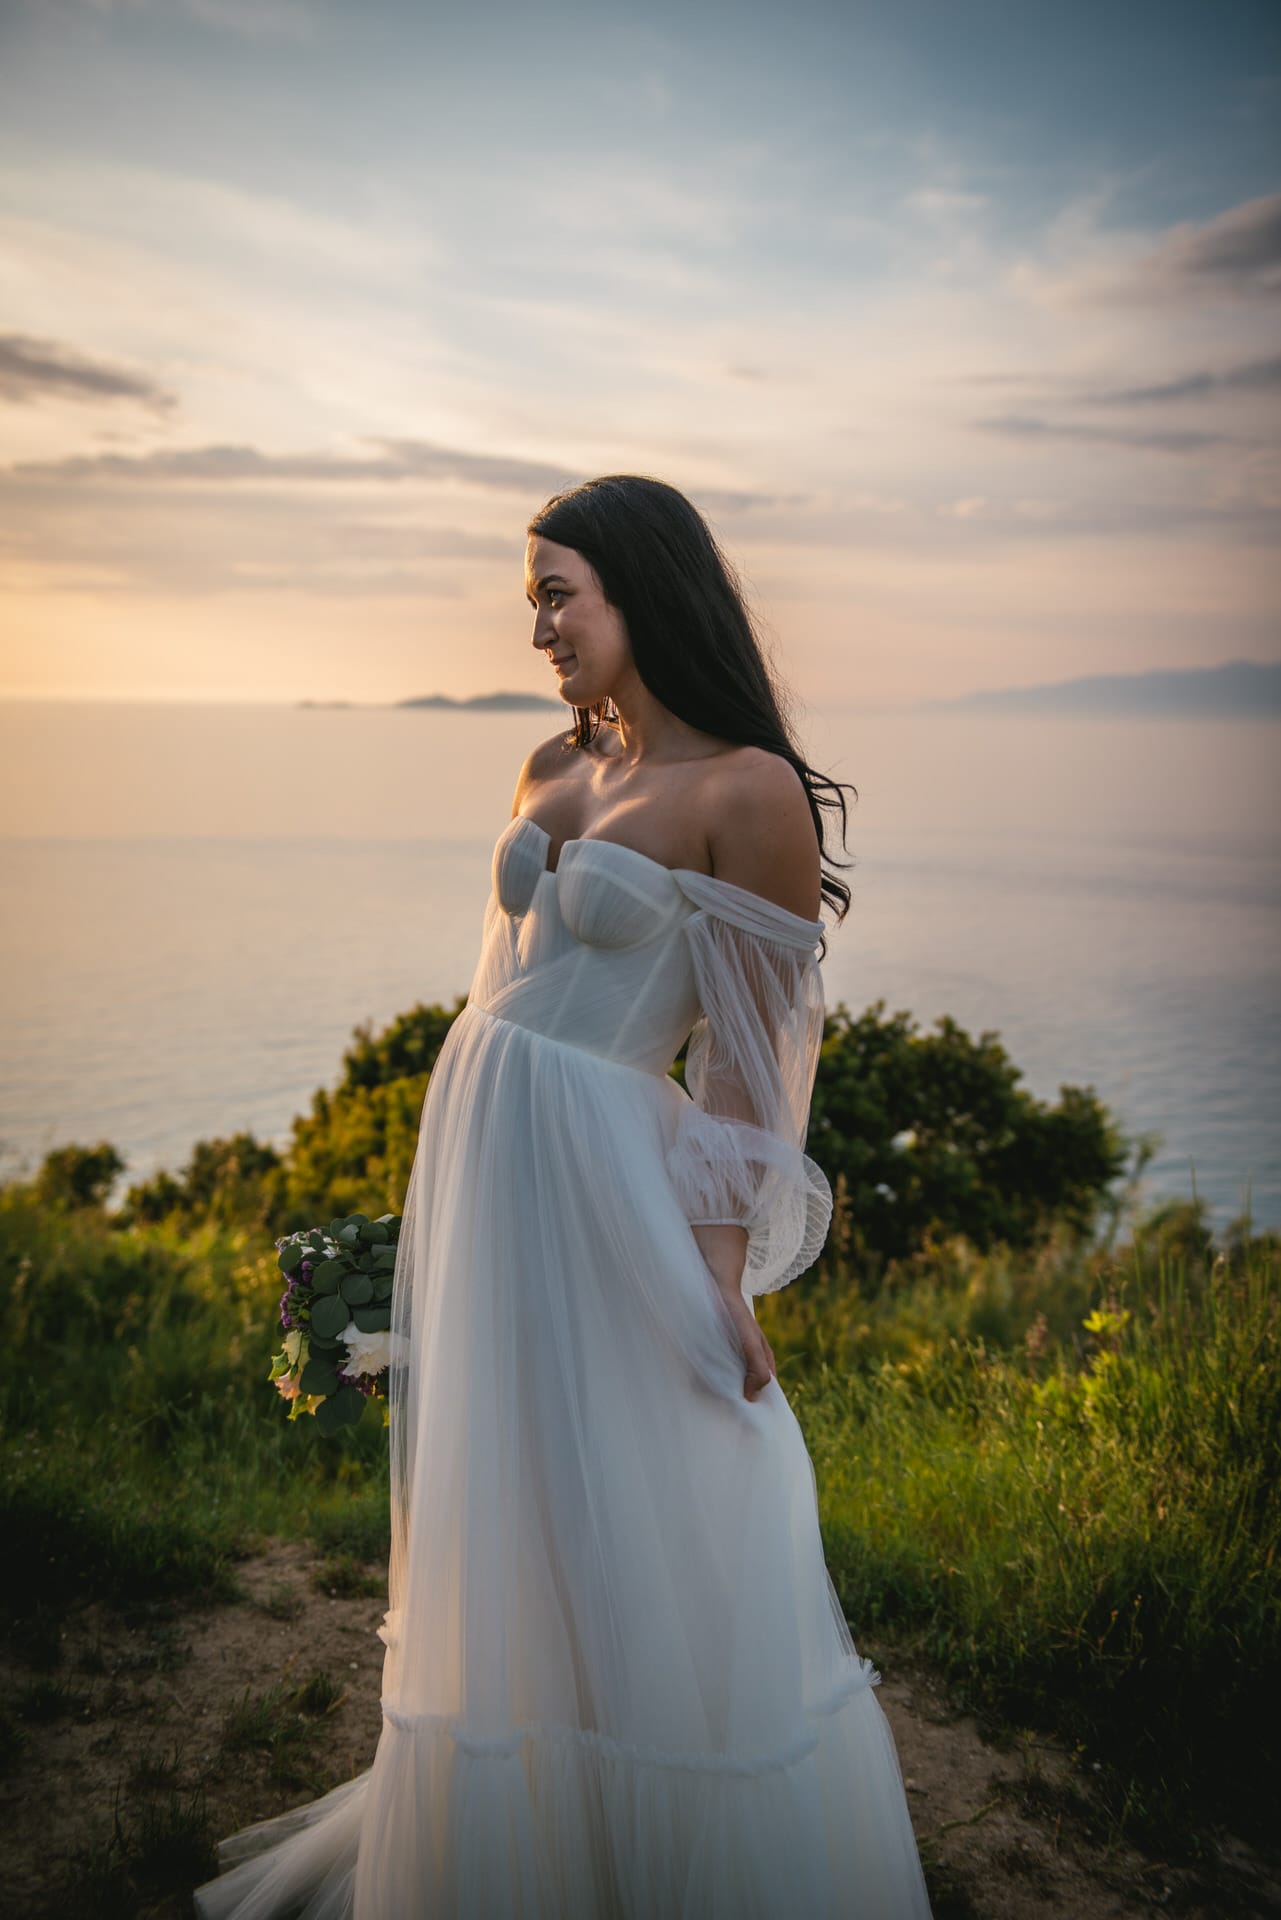 Intricate detail of the bride, her essence radiating in their Corfu elopement